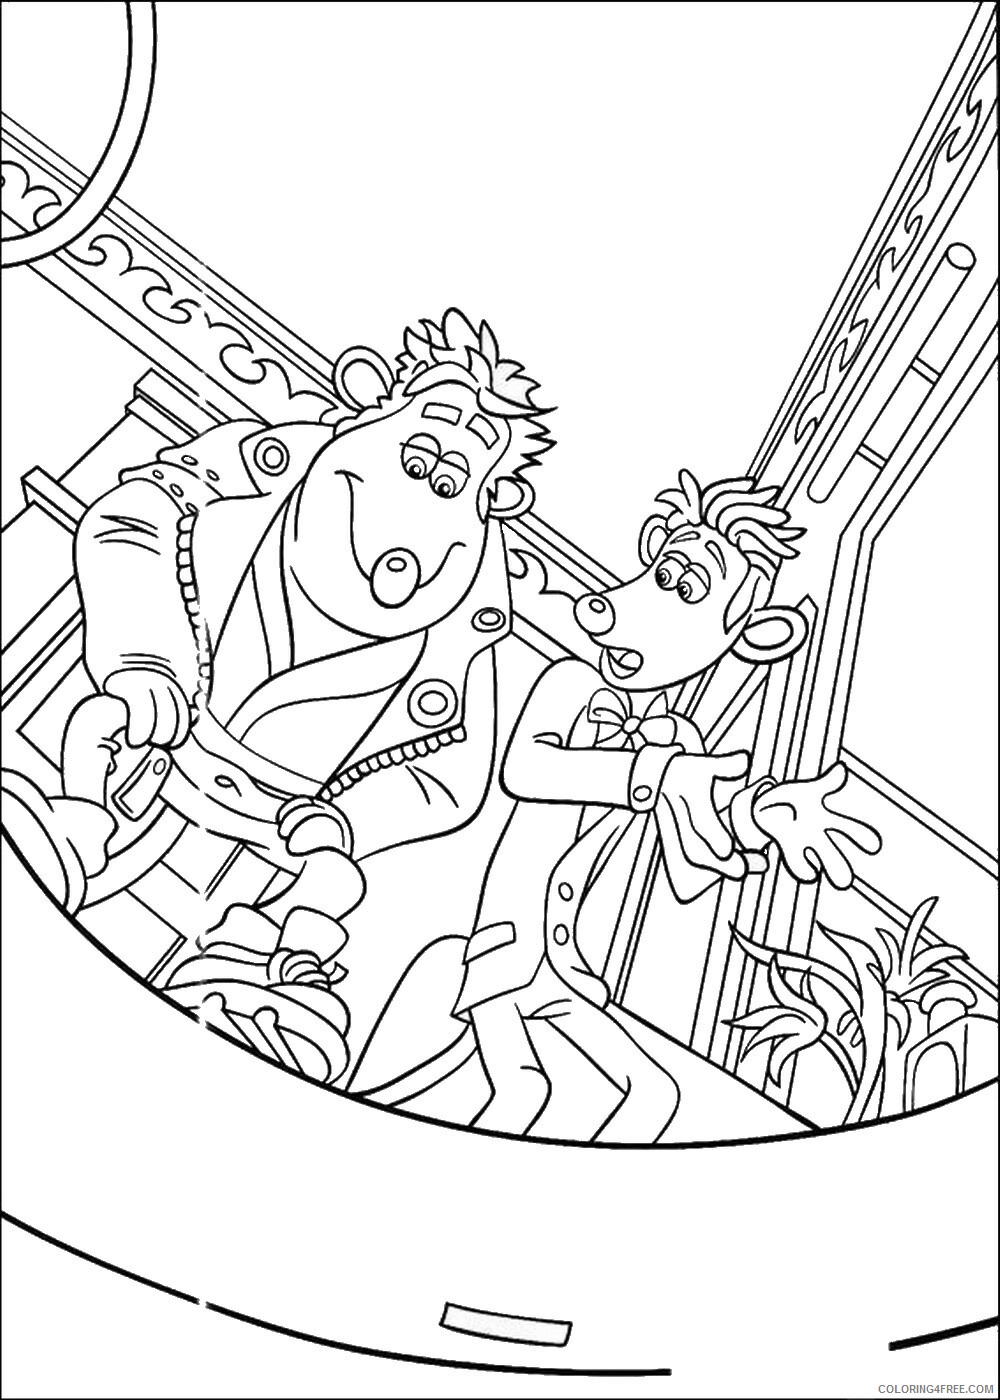 Flushed Away Coloring Pages TV Film flushed_cl_04 Printable 2020 02963 Coloring4free